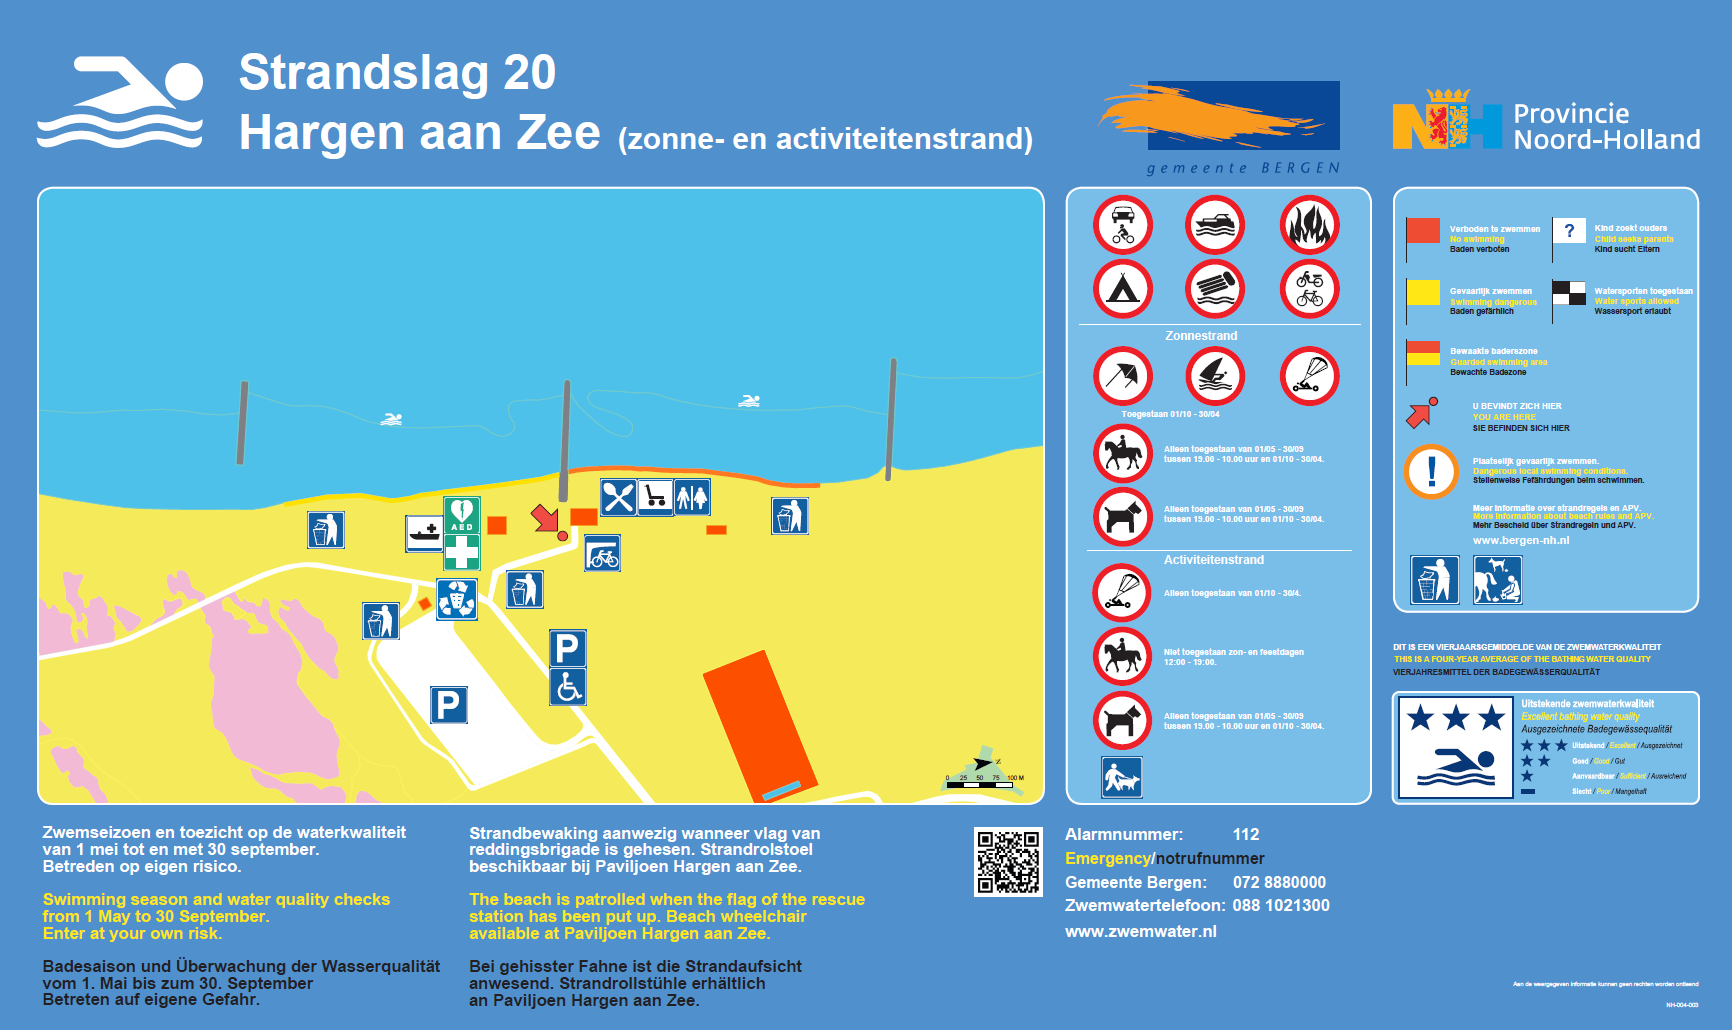 The information board at the swimming location Hargen aan Zee, Strandslag 20